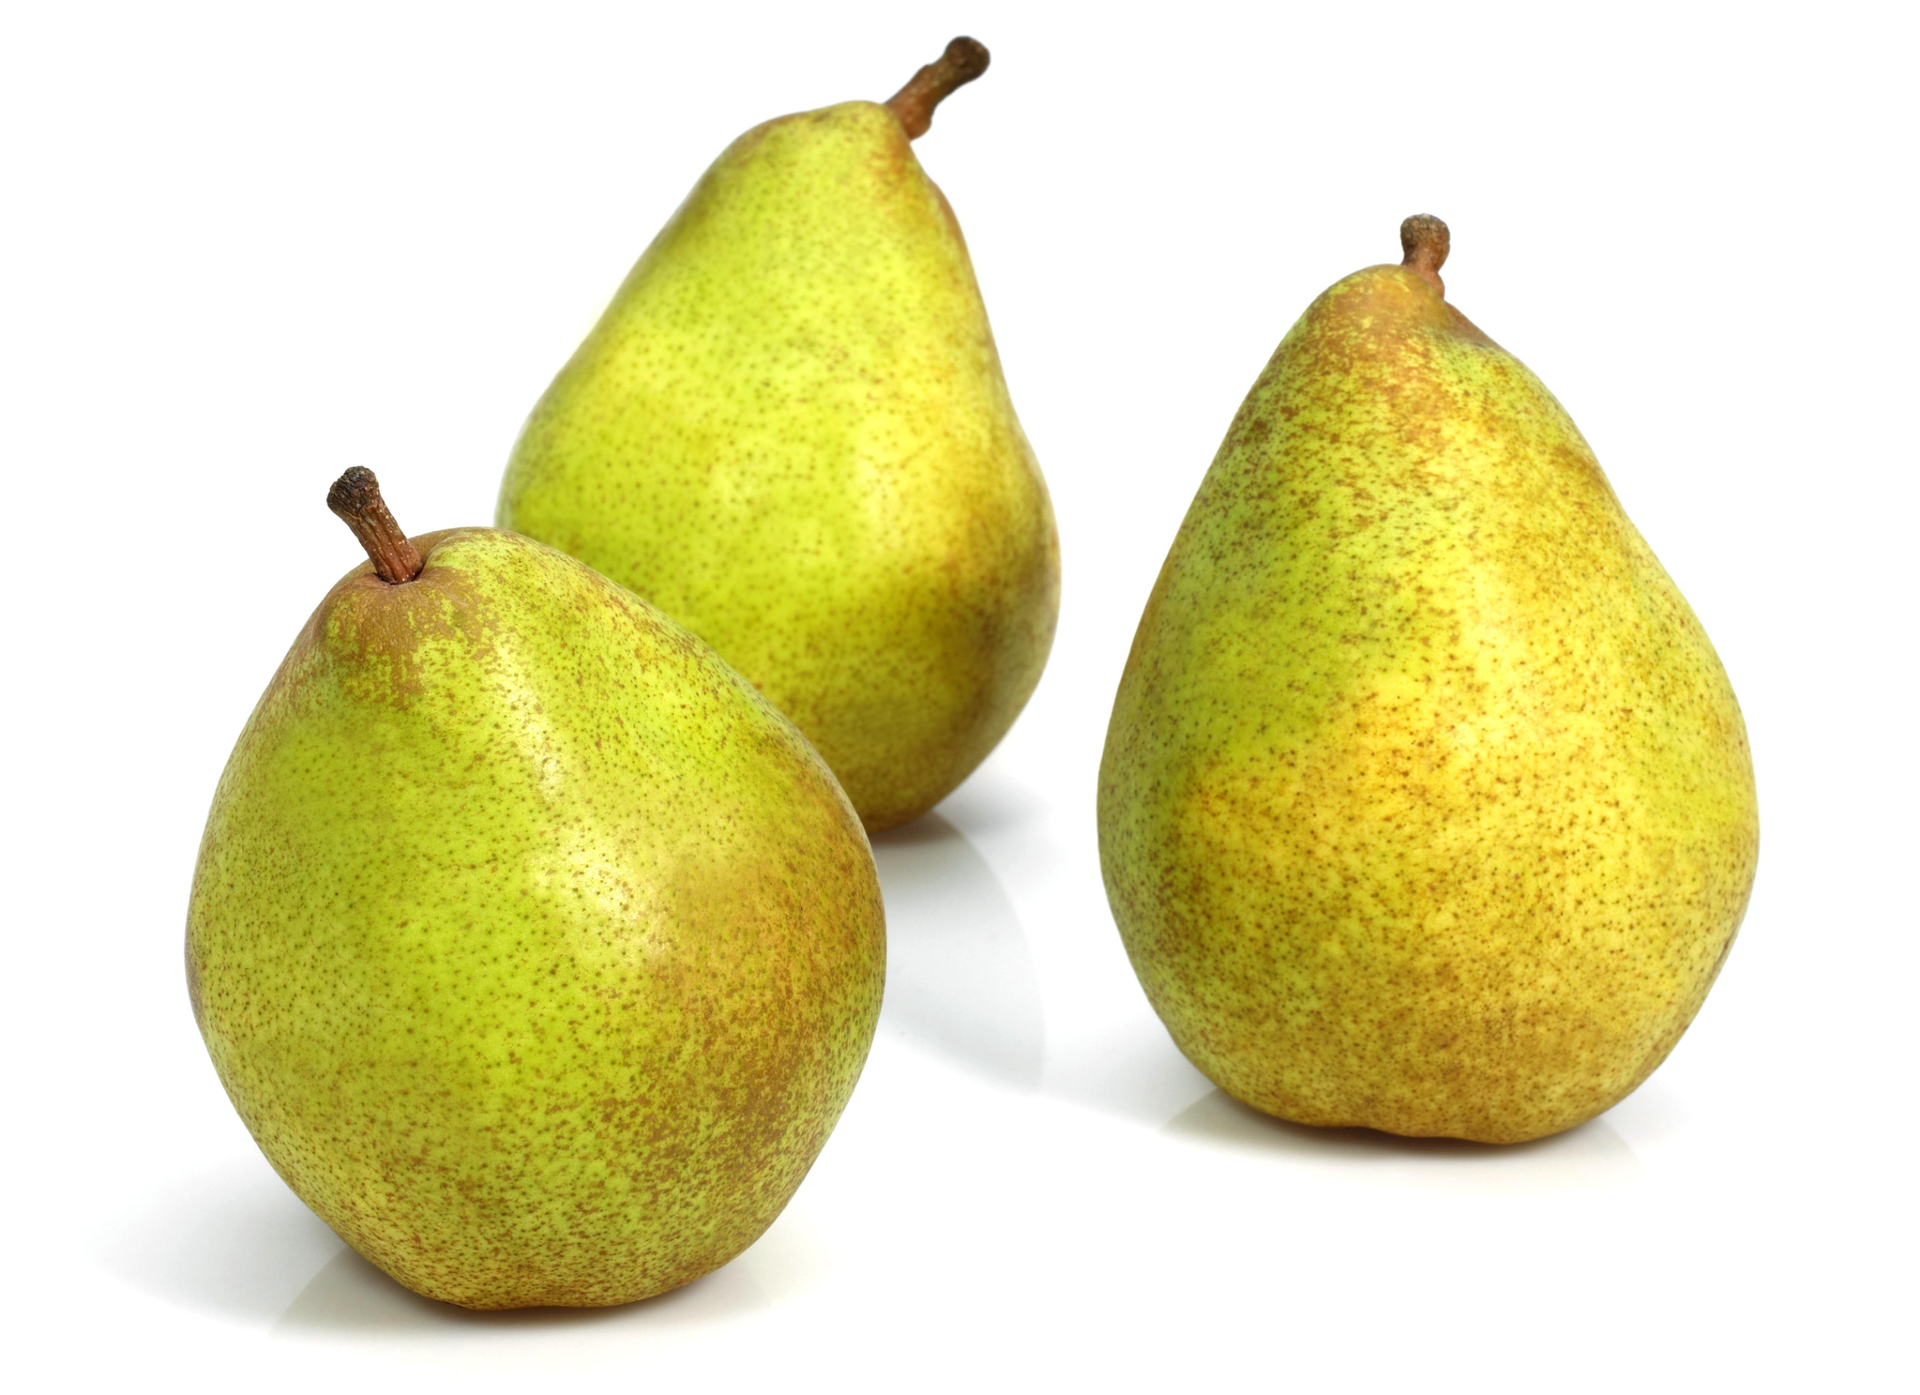 https://impro.usercontent.one/appid/oneComShop/domain/myexoticfruit.com/media/myexoticfruit.com/webshopmedia/fresh-delicious-comice-pears-which-are-wonderfully-sweet-and-crisp-are-ready-to-buy-now-alongside-an-amazing-variety-of-other-fruits-from-myexoticfruit-0x2e-com-1700146122738.png?&withoutEnlargement&resize=1920+9999